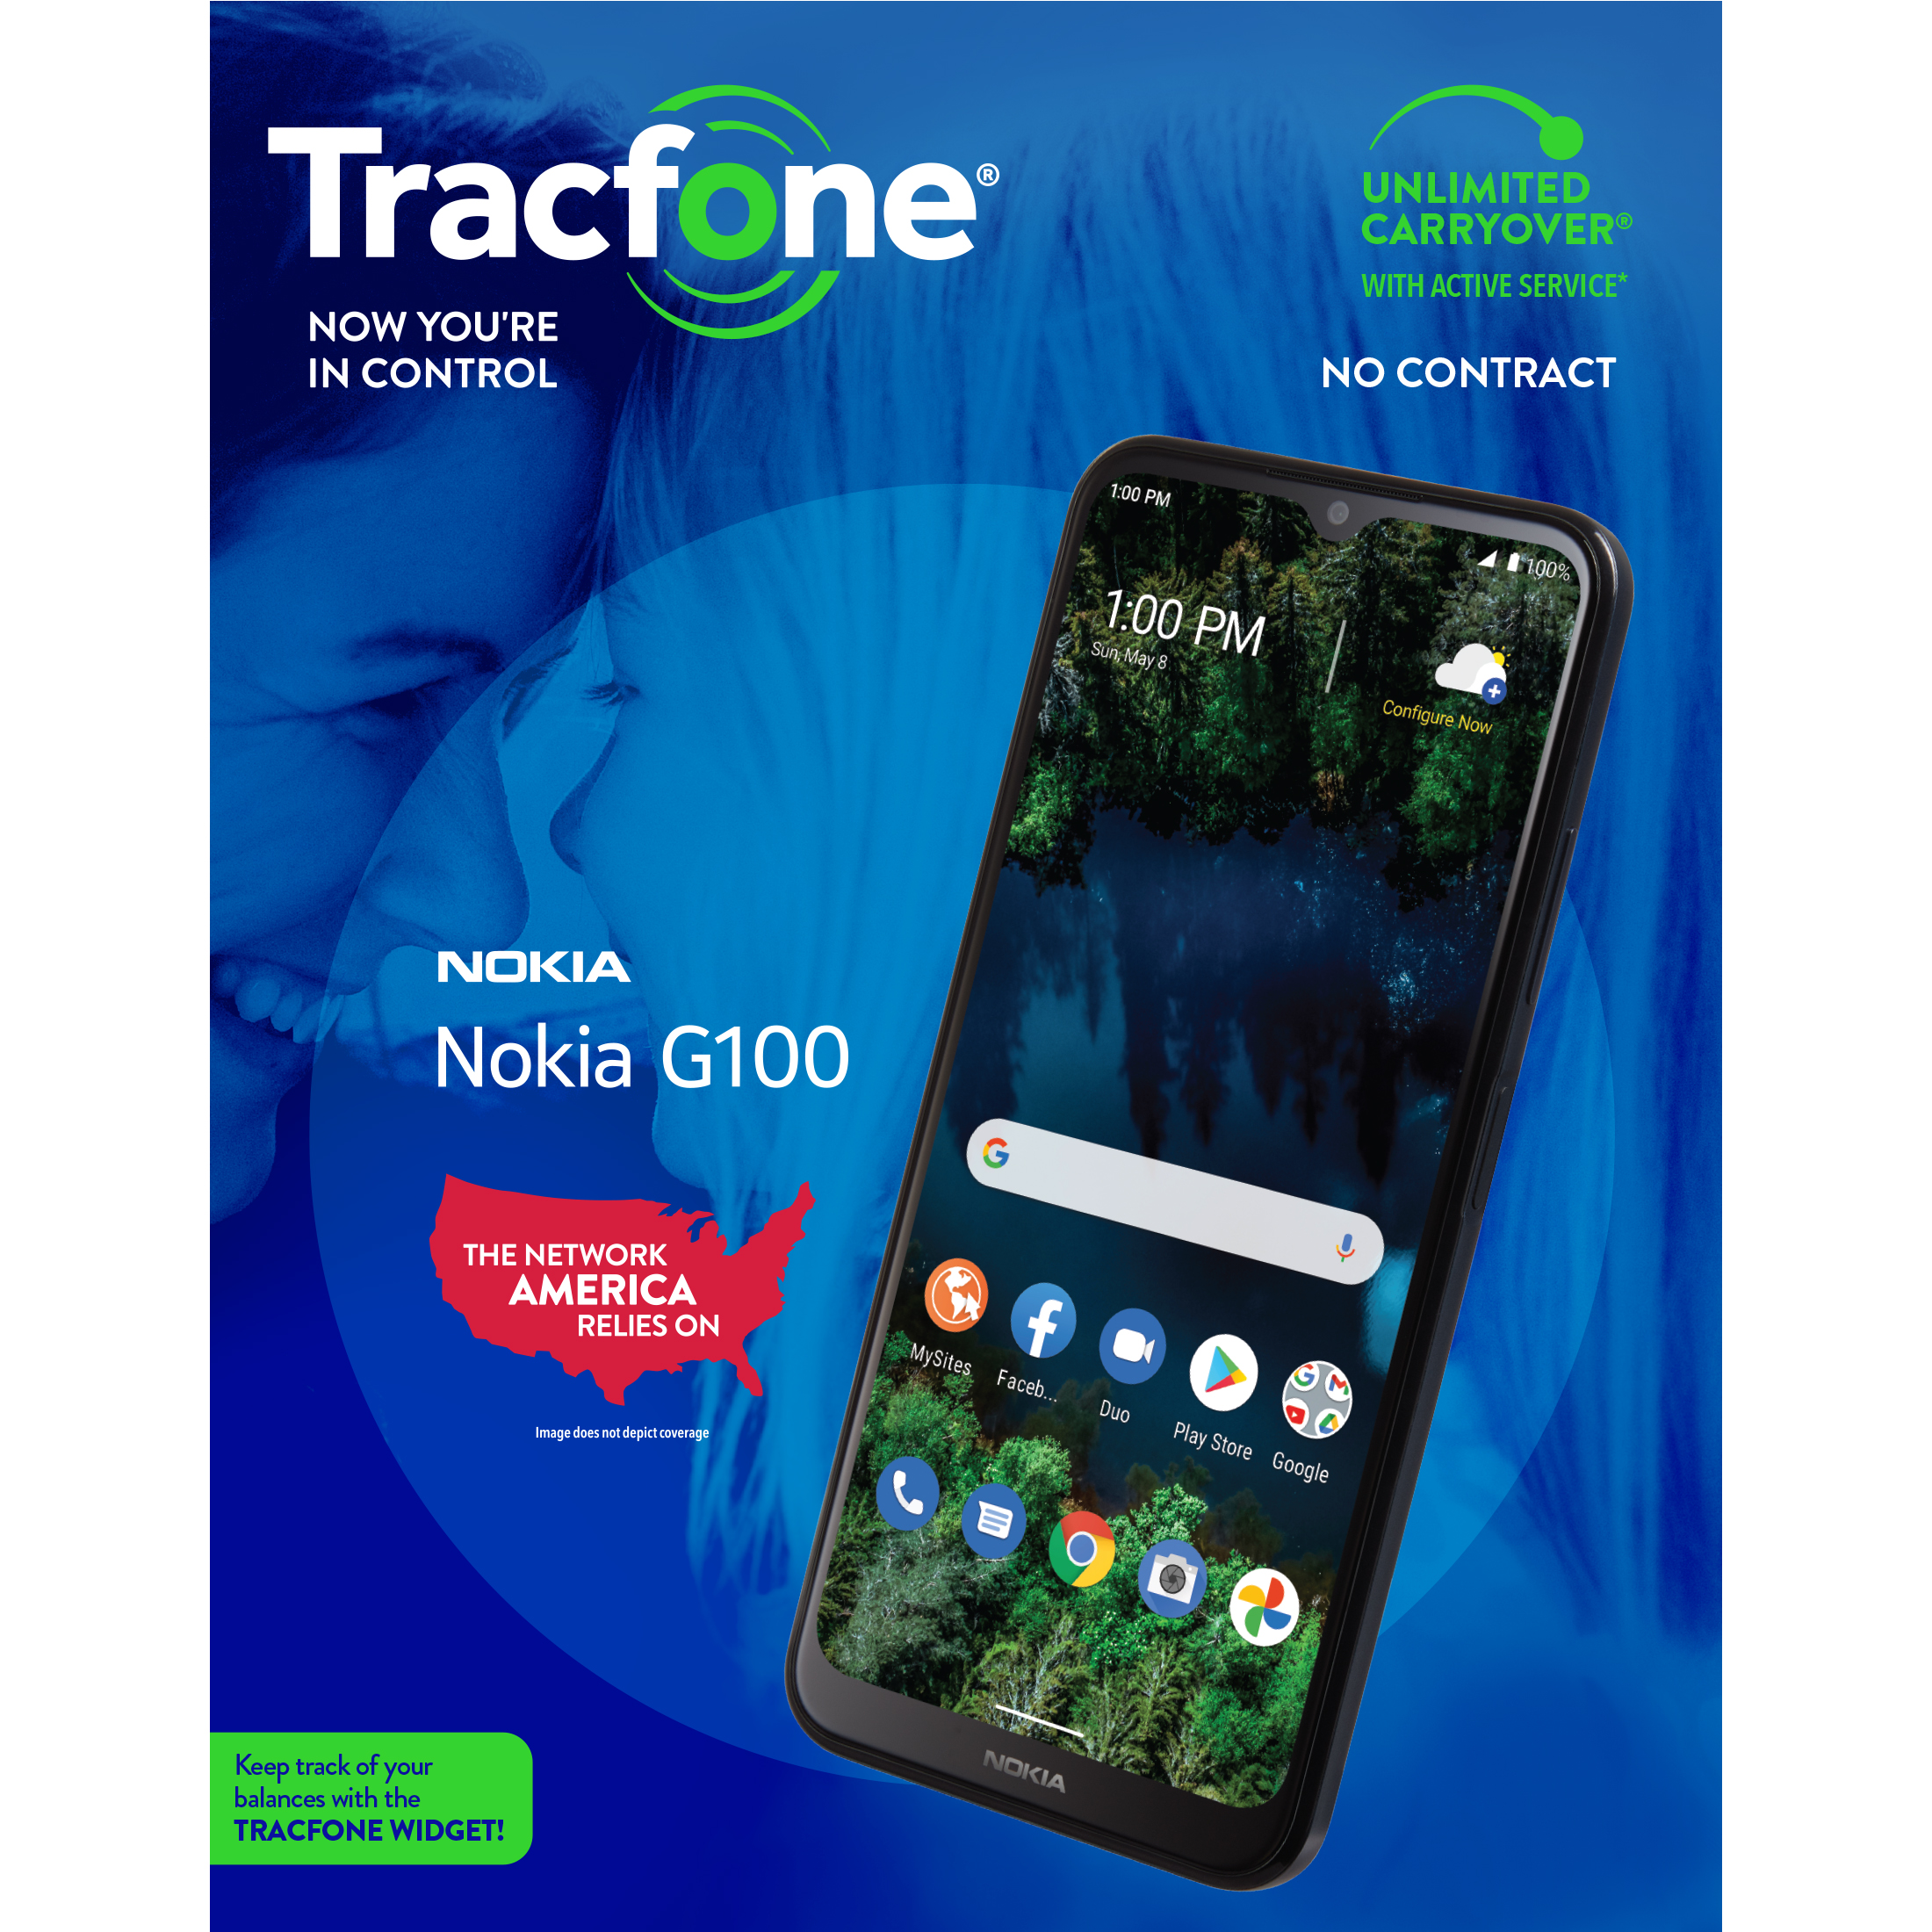 Tracfone Nokia C100, 32GB, Blue- Prepaid Smartphone [Locked to Tracfone Wireless] - image 12 of 12